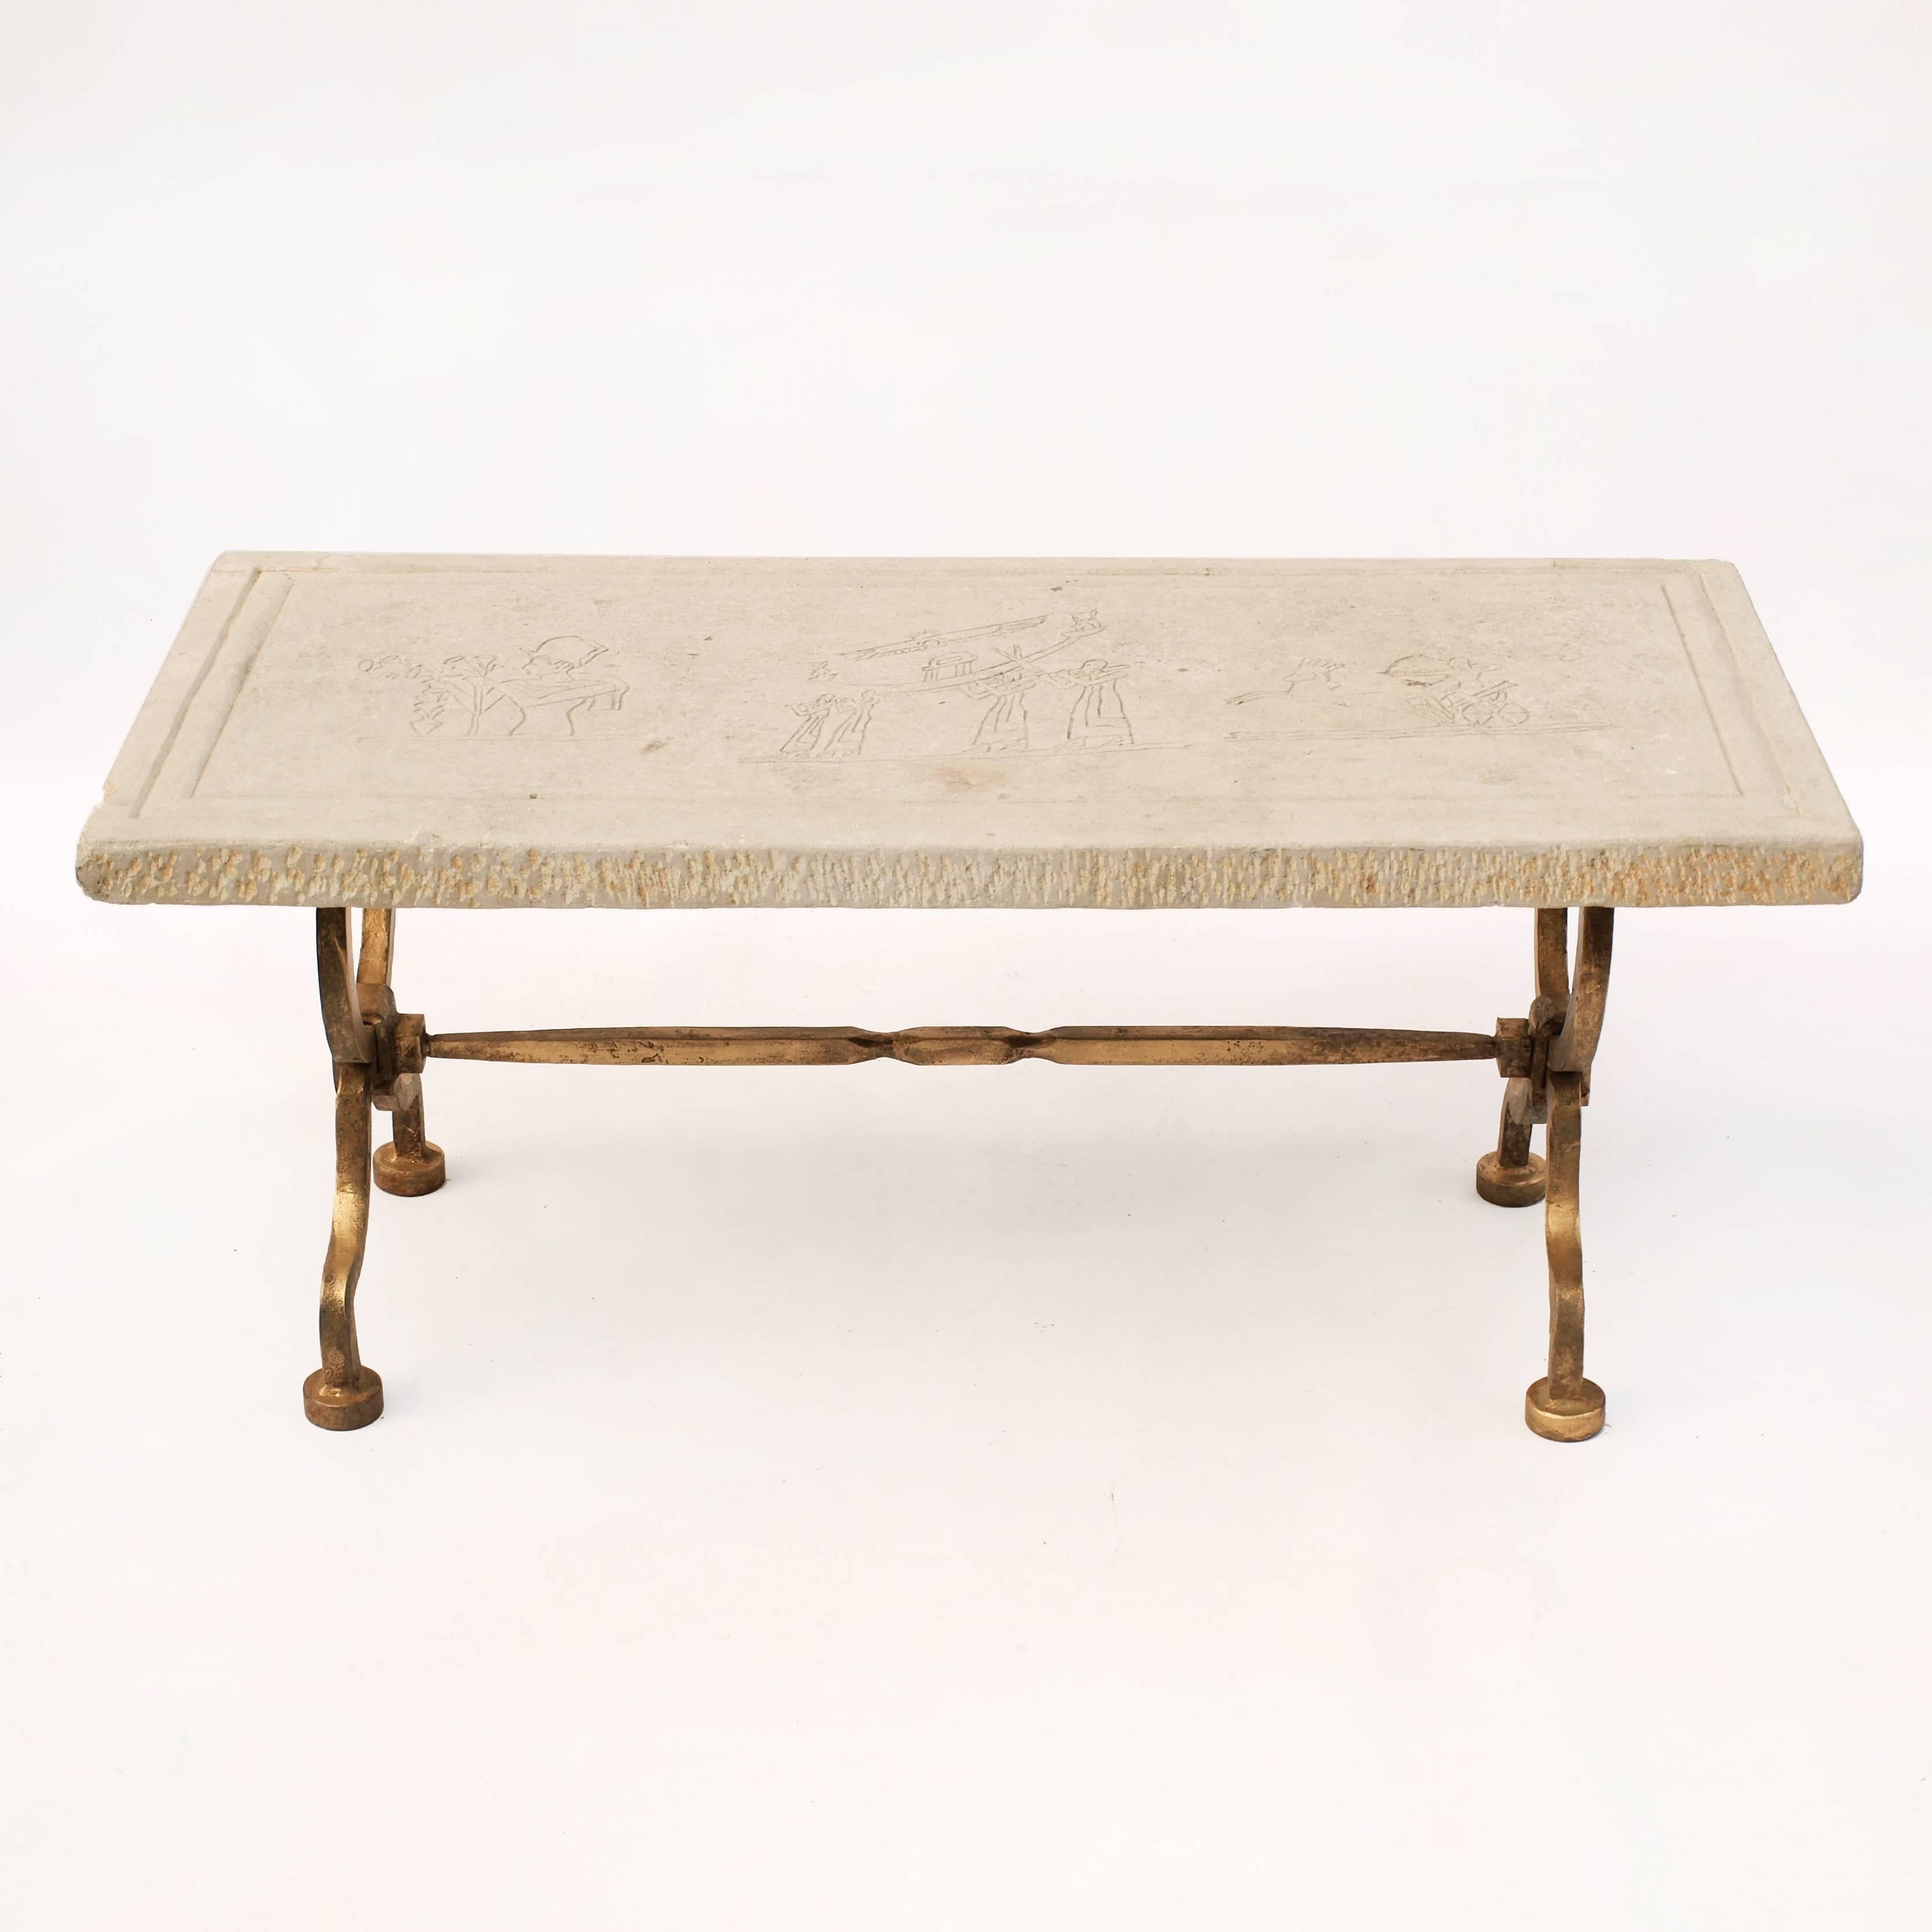 A cast iron base with a gold gilt effect on the surface and repeated decorative motifs following the shape of the legs, supports a limestone top with ancient Egypt inspired carved imagery.
The table dates from the early 1940's and the carvings on